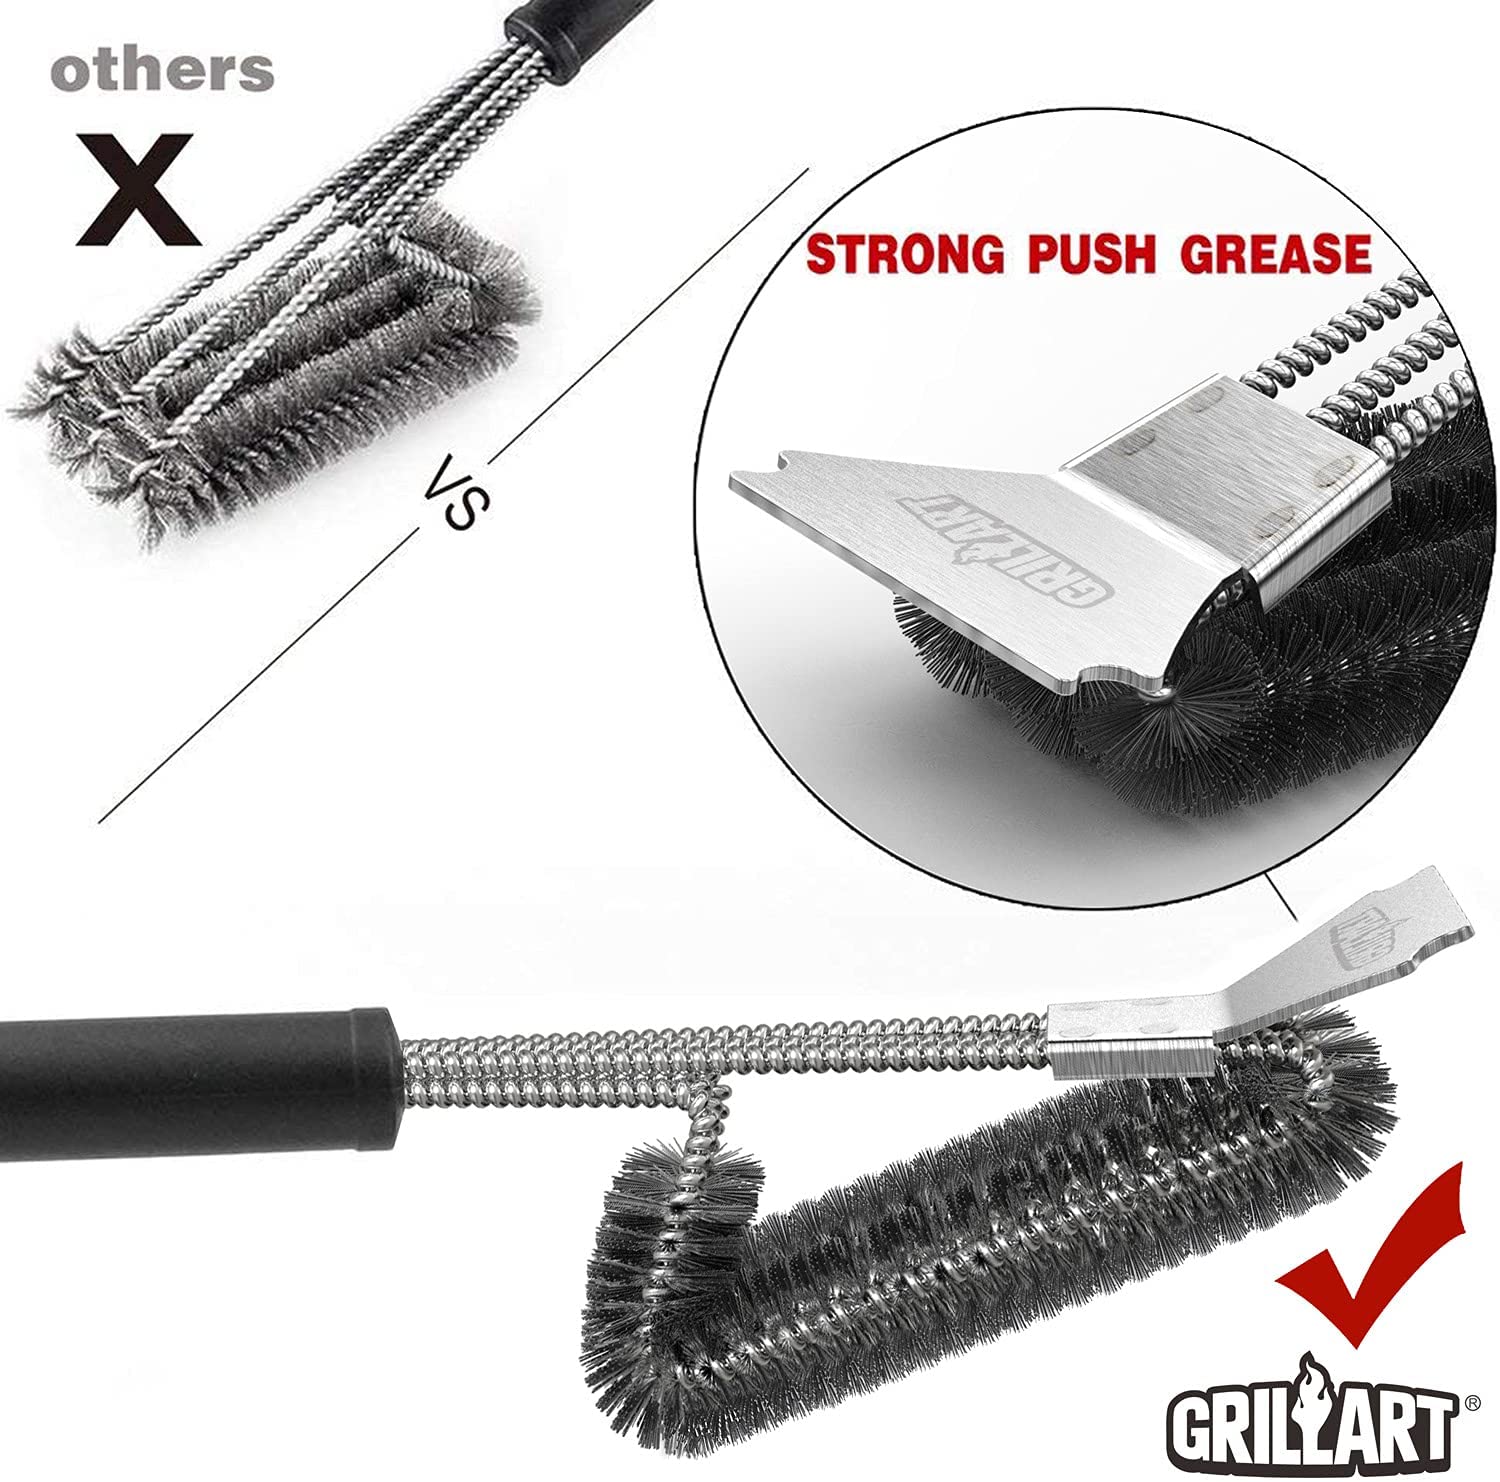 Grillart Grill Brush and Scraper,18 inch BBQ Grill Cleaning Brush Kit, Safe Wire Scrubber, Universal Fit BBQ Cleaner Accessories for All Grates